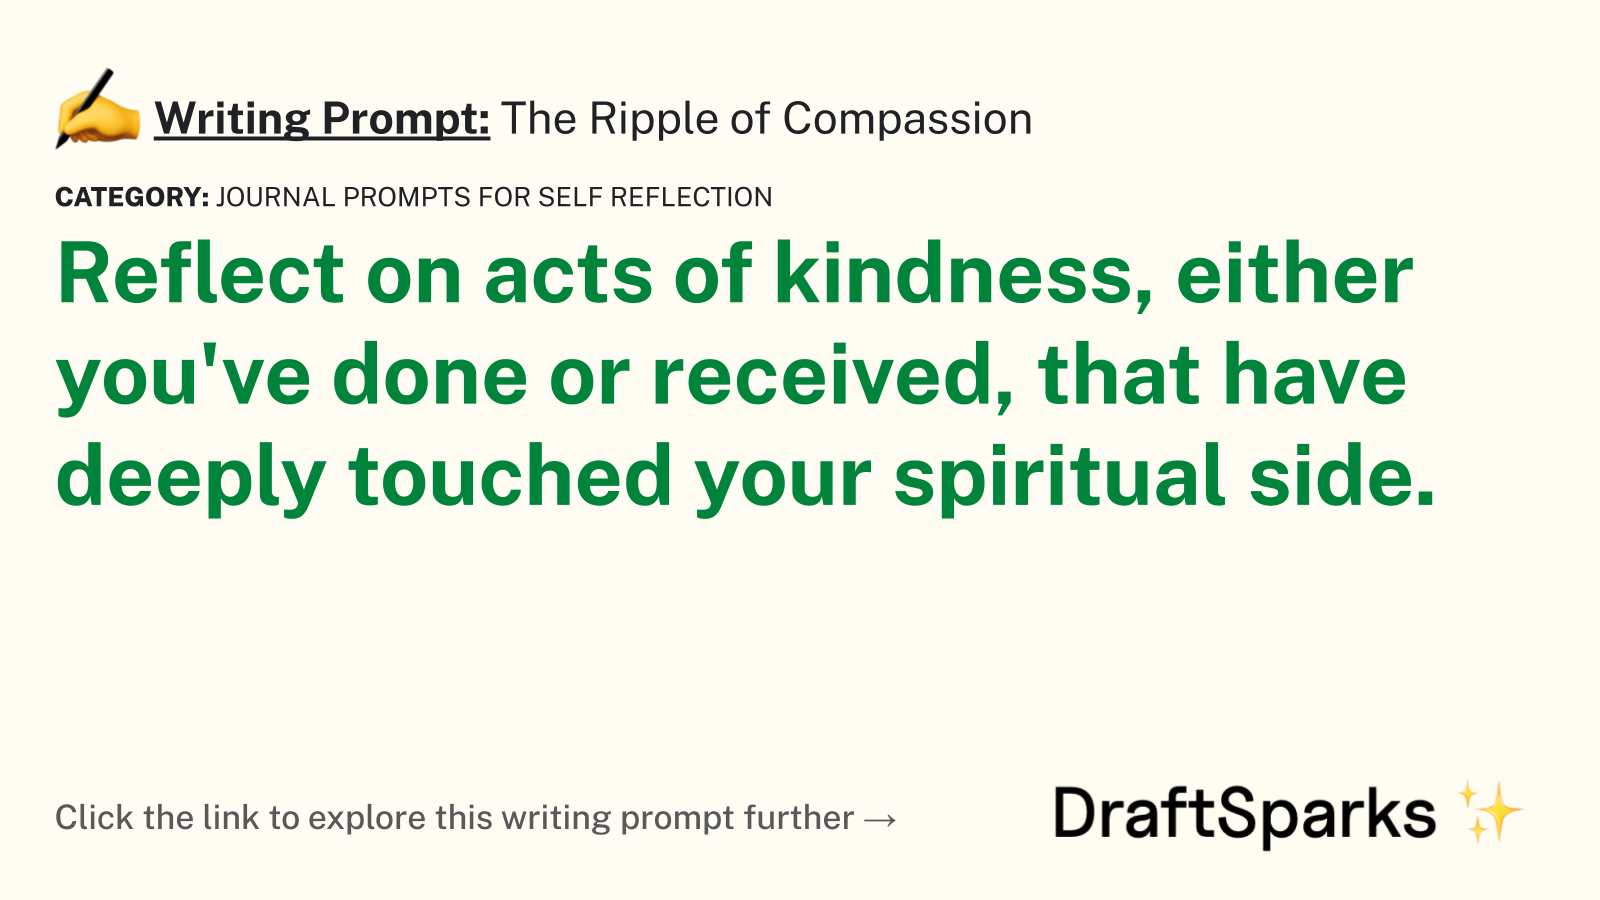 The Ripple of Compassion